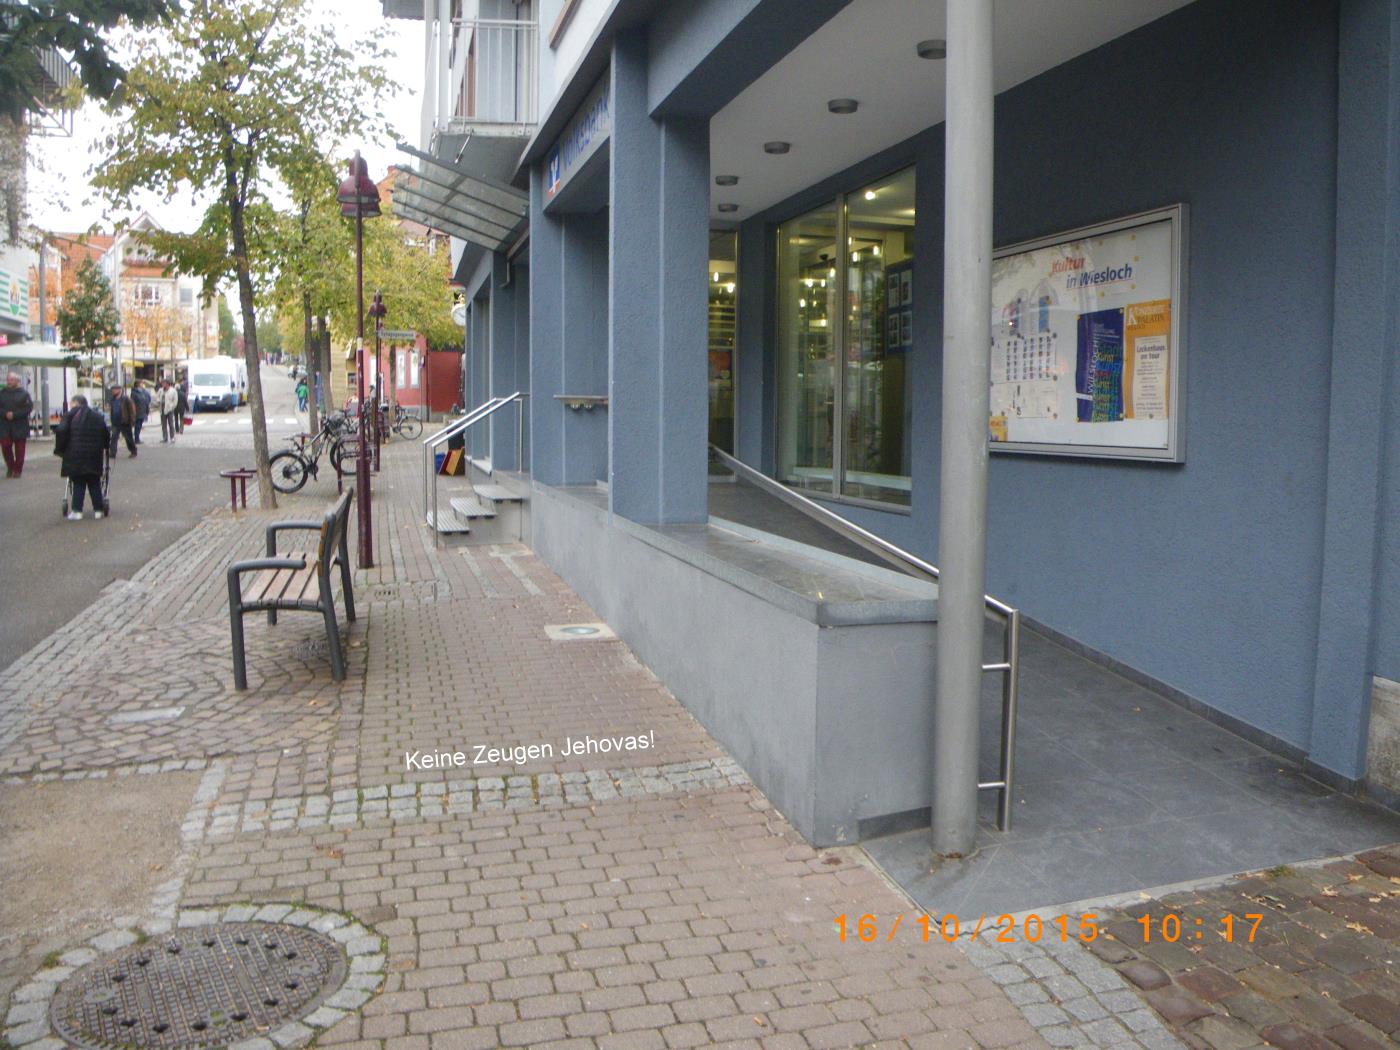 No Jehovah's Witnesses in Wiesloch